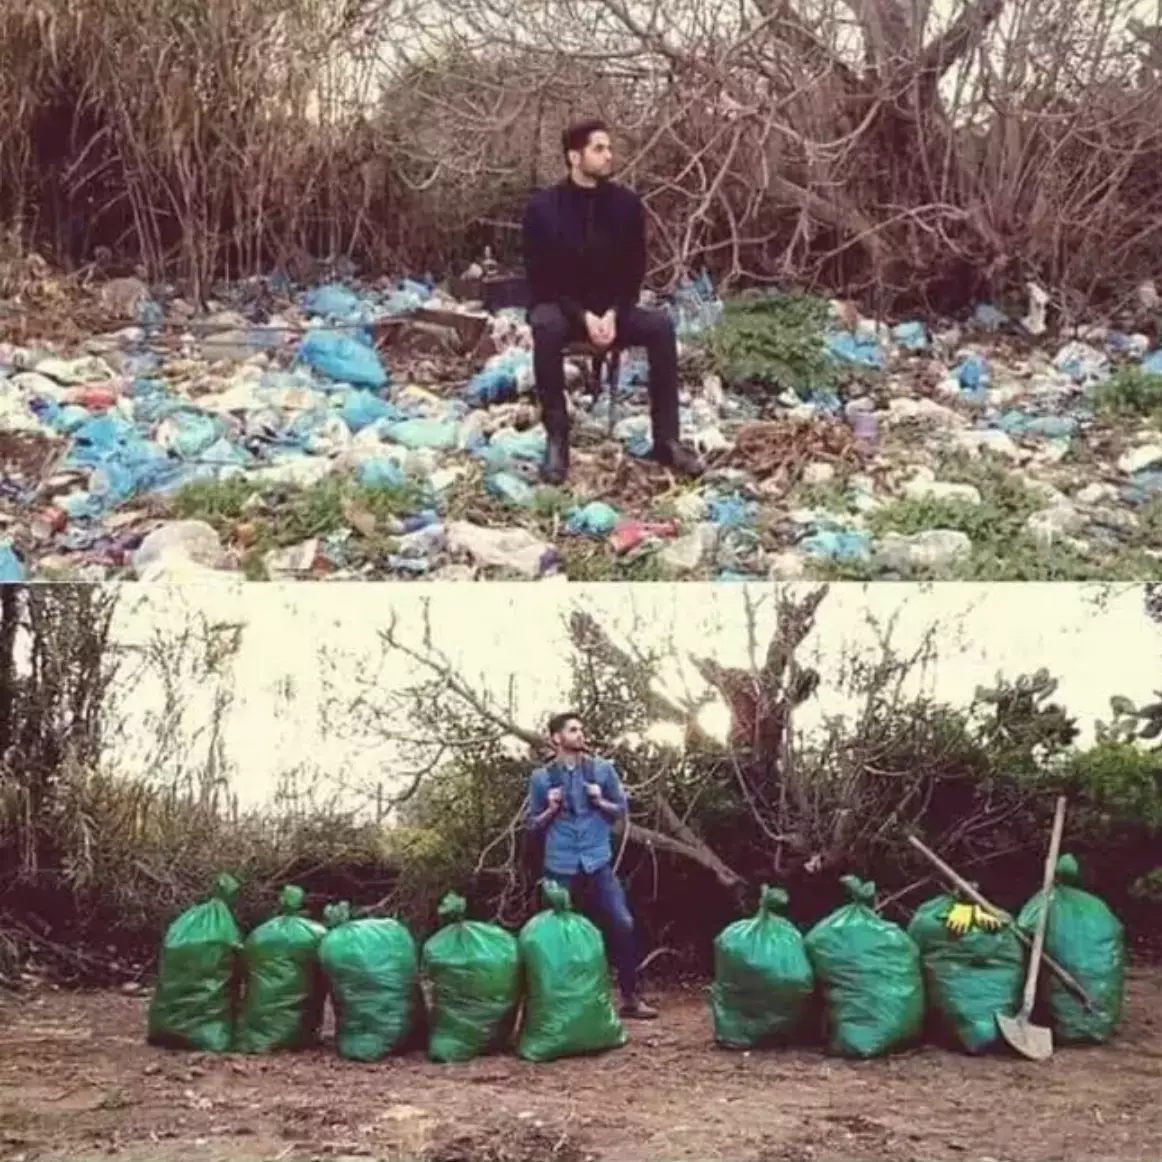 The trash challenge went viral on social media and saw loads of people clean up their local area.